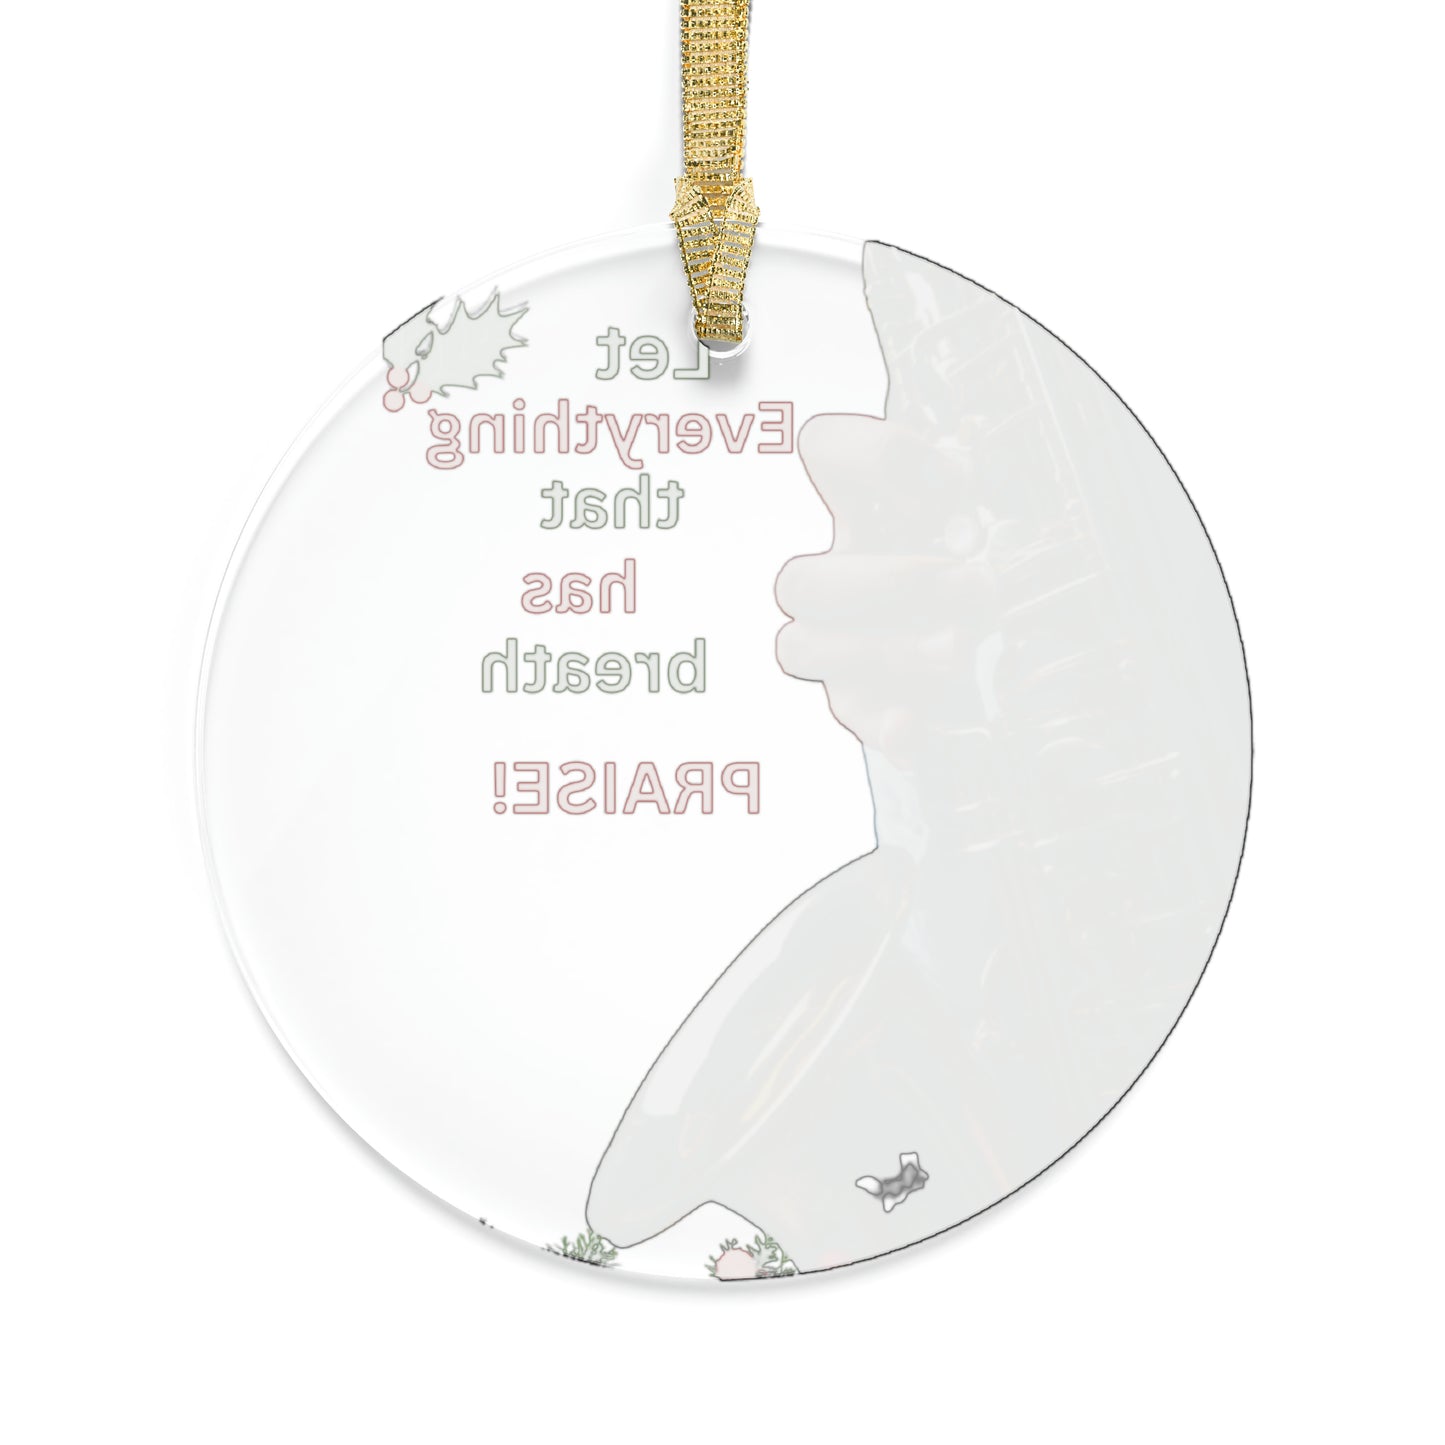 Let Everything that Has Breath Praise | Acrylic Ornaments